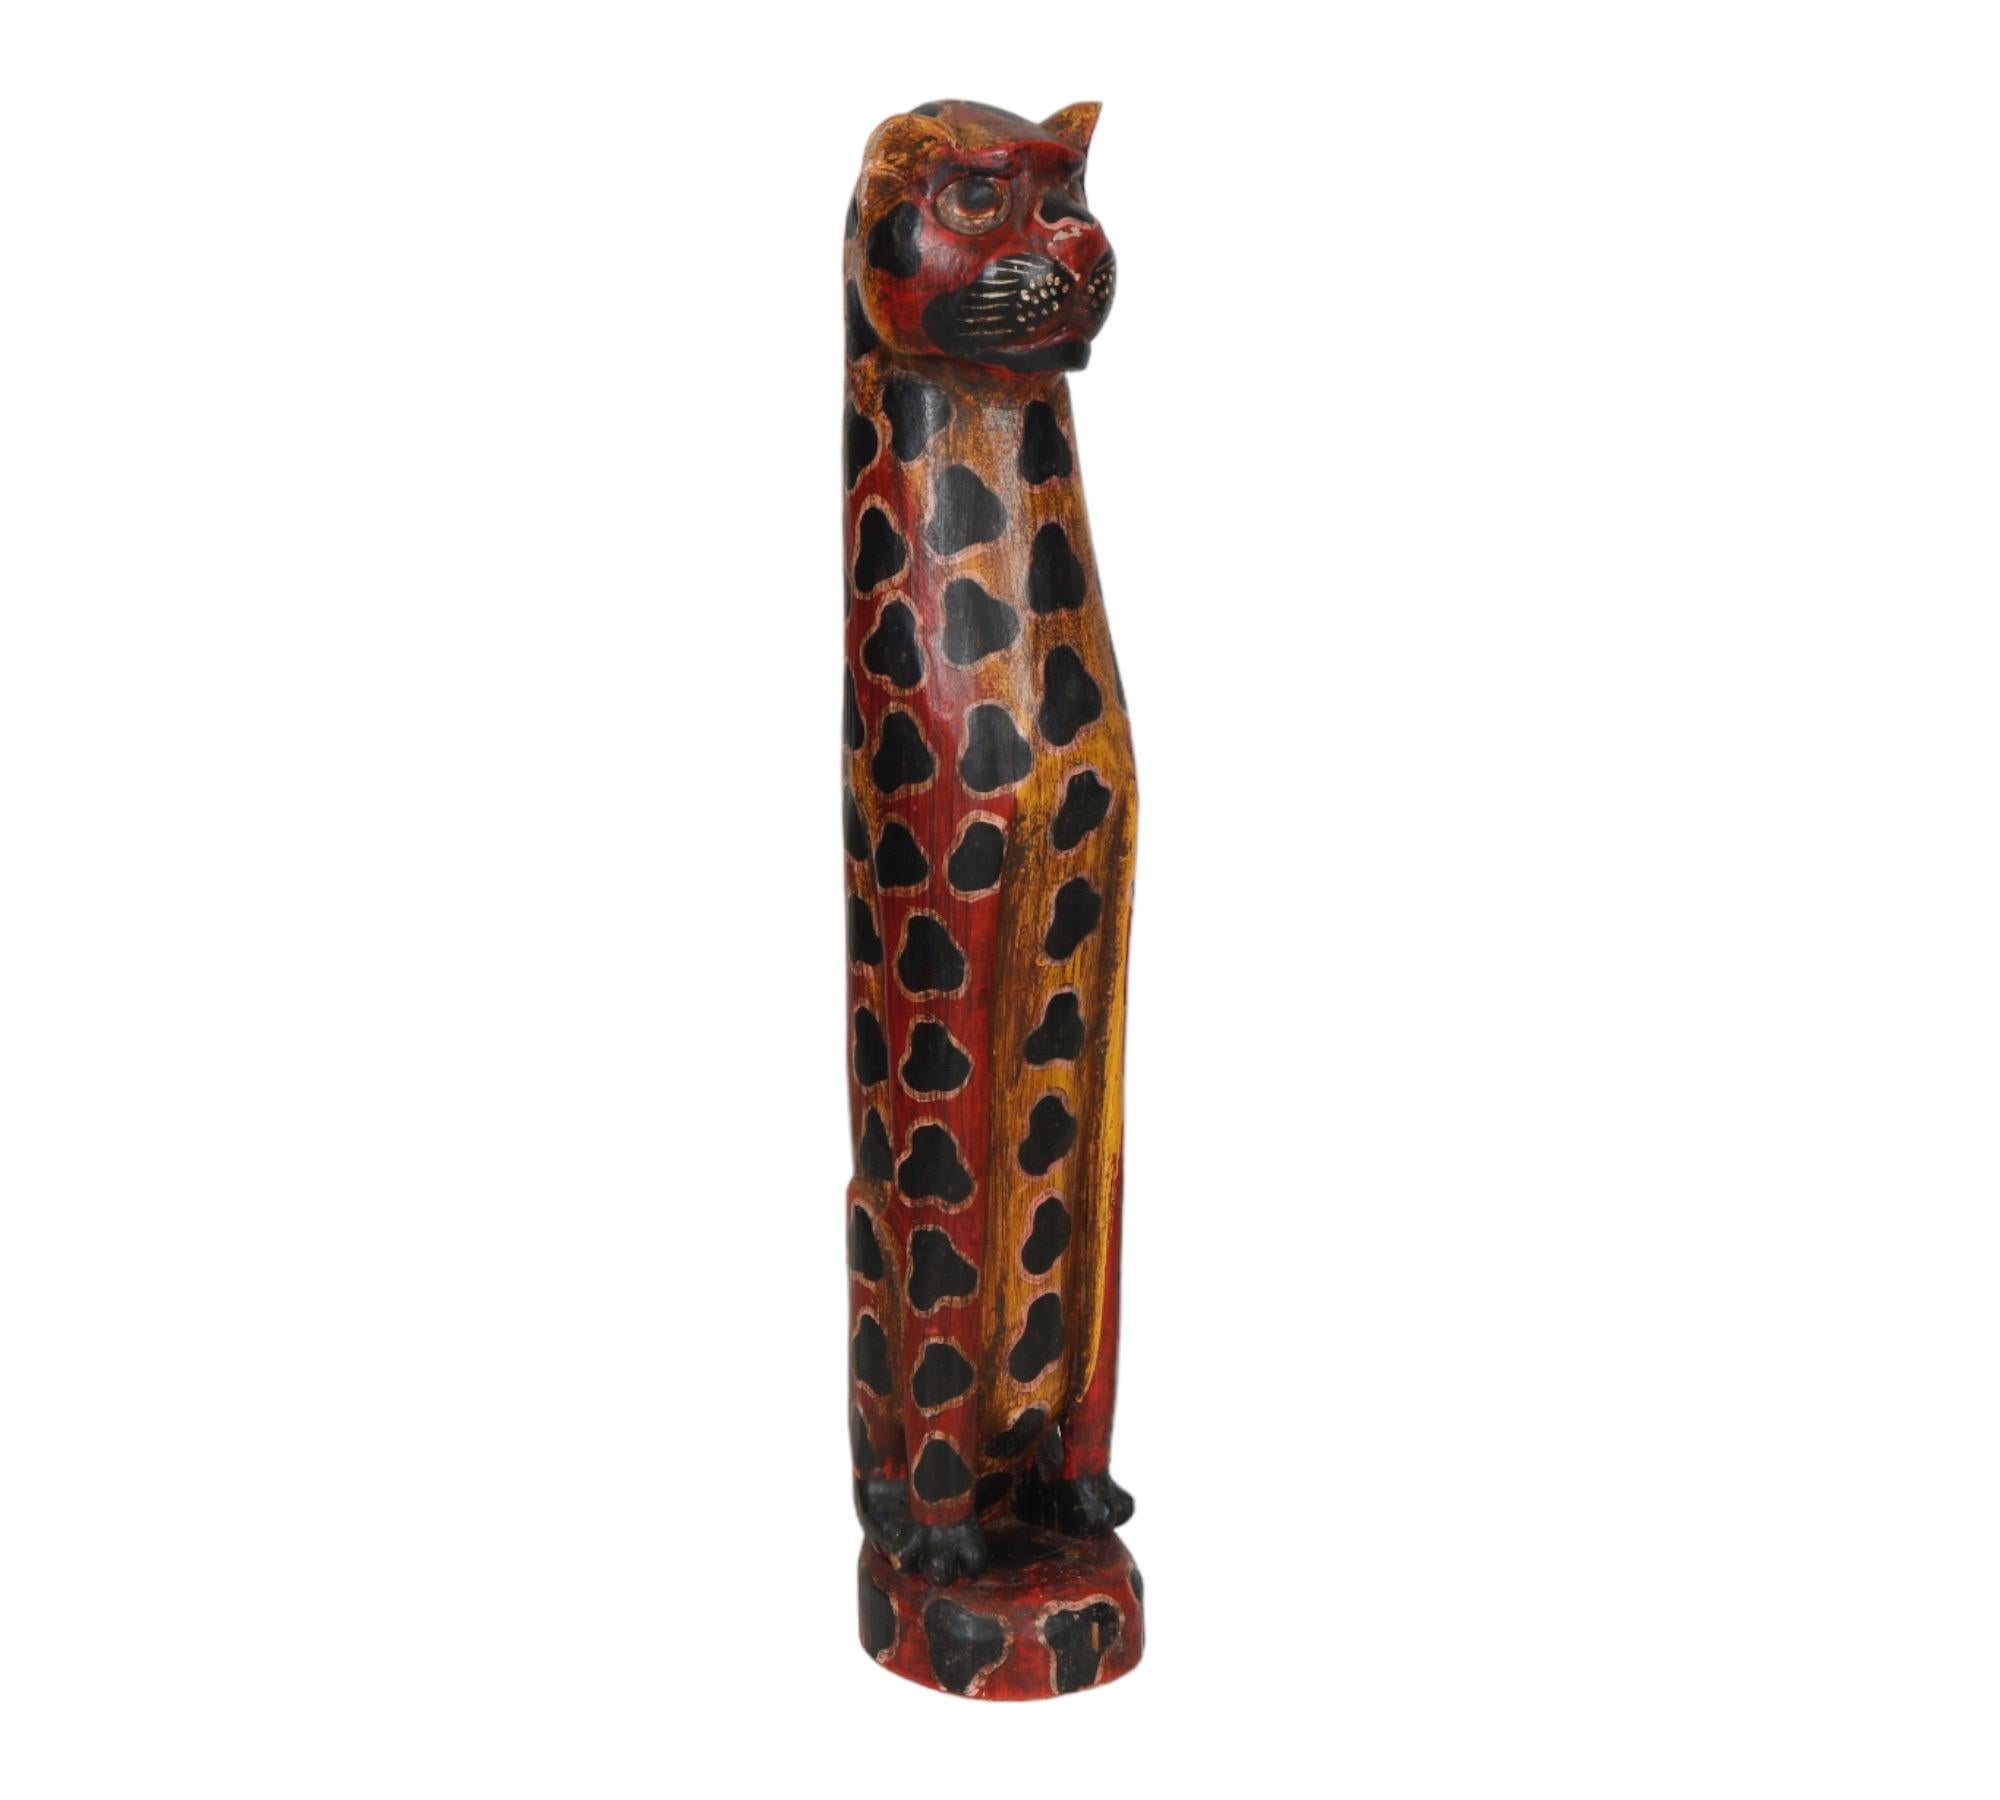 A tall hand carved wooden statue of a seated leopard on a round base. Hand painted throughout in red and yellow with black spots edged in pink. Carved with graceful curves and details defining the features of the face, paws and tail.
